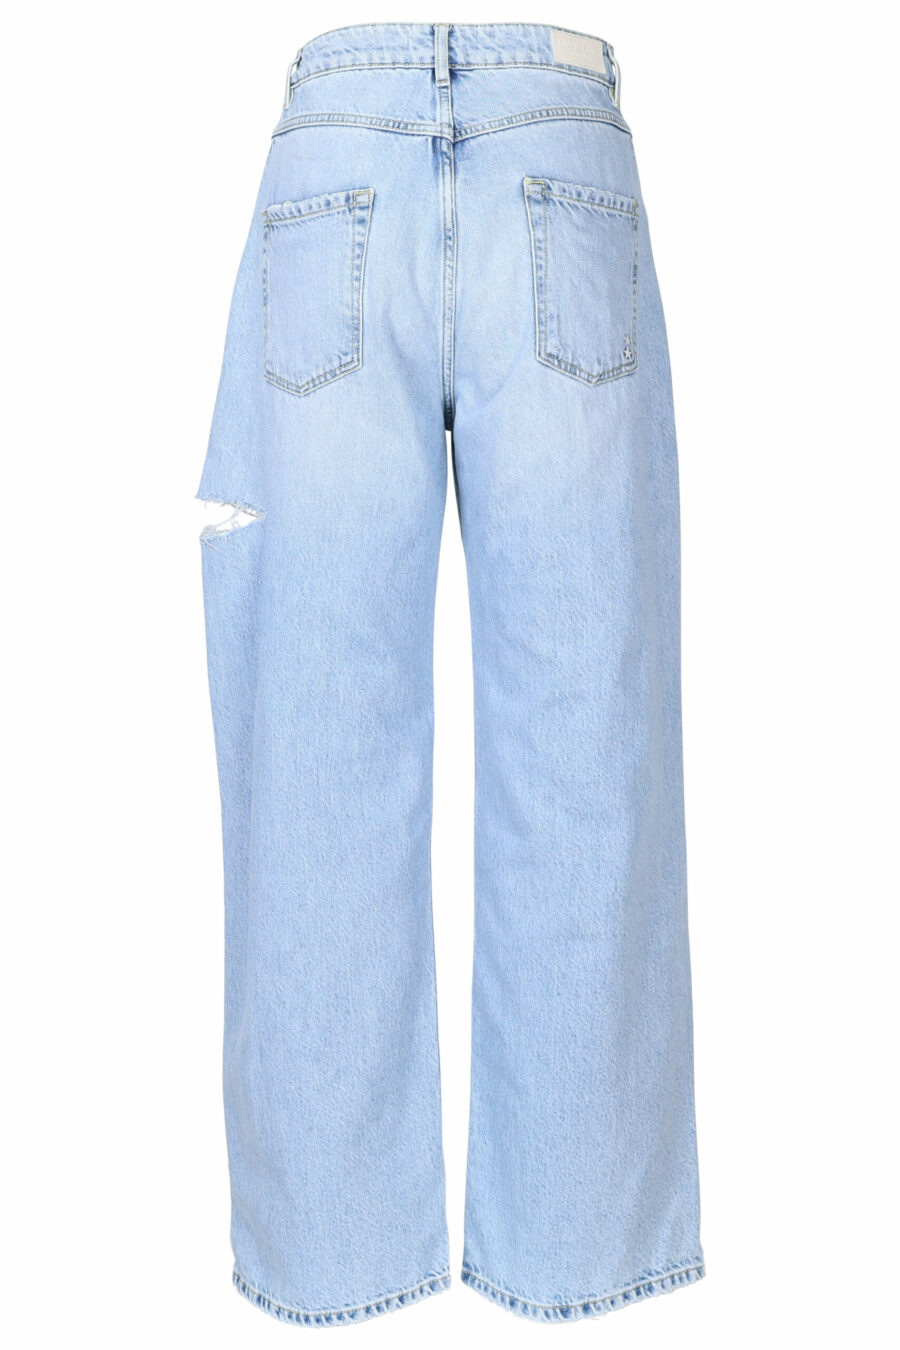 Blue "poppy" jeans with rips - 8052691167298 2 scaled